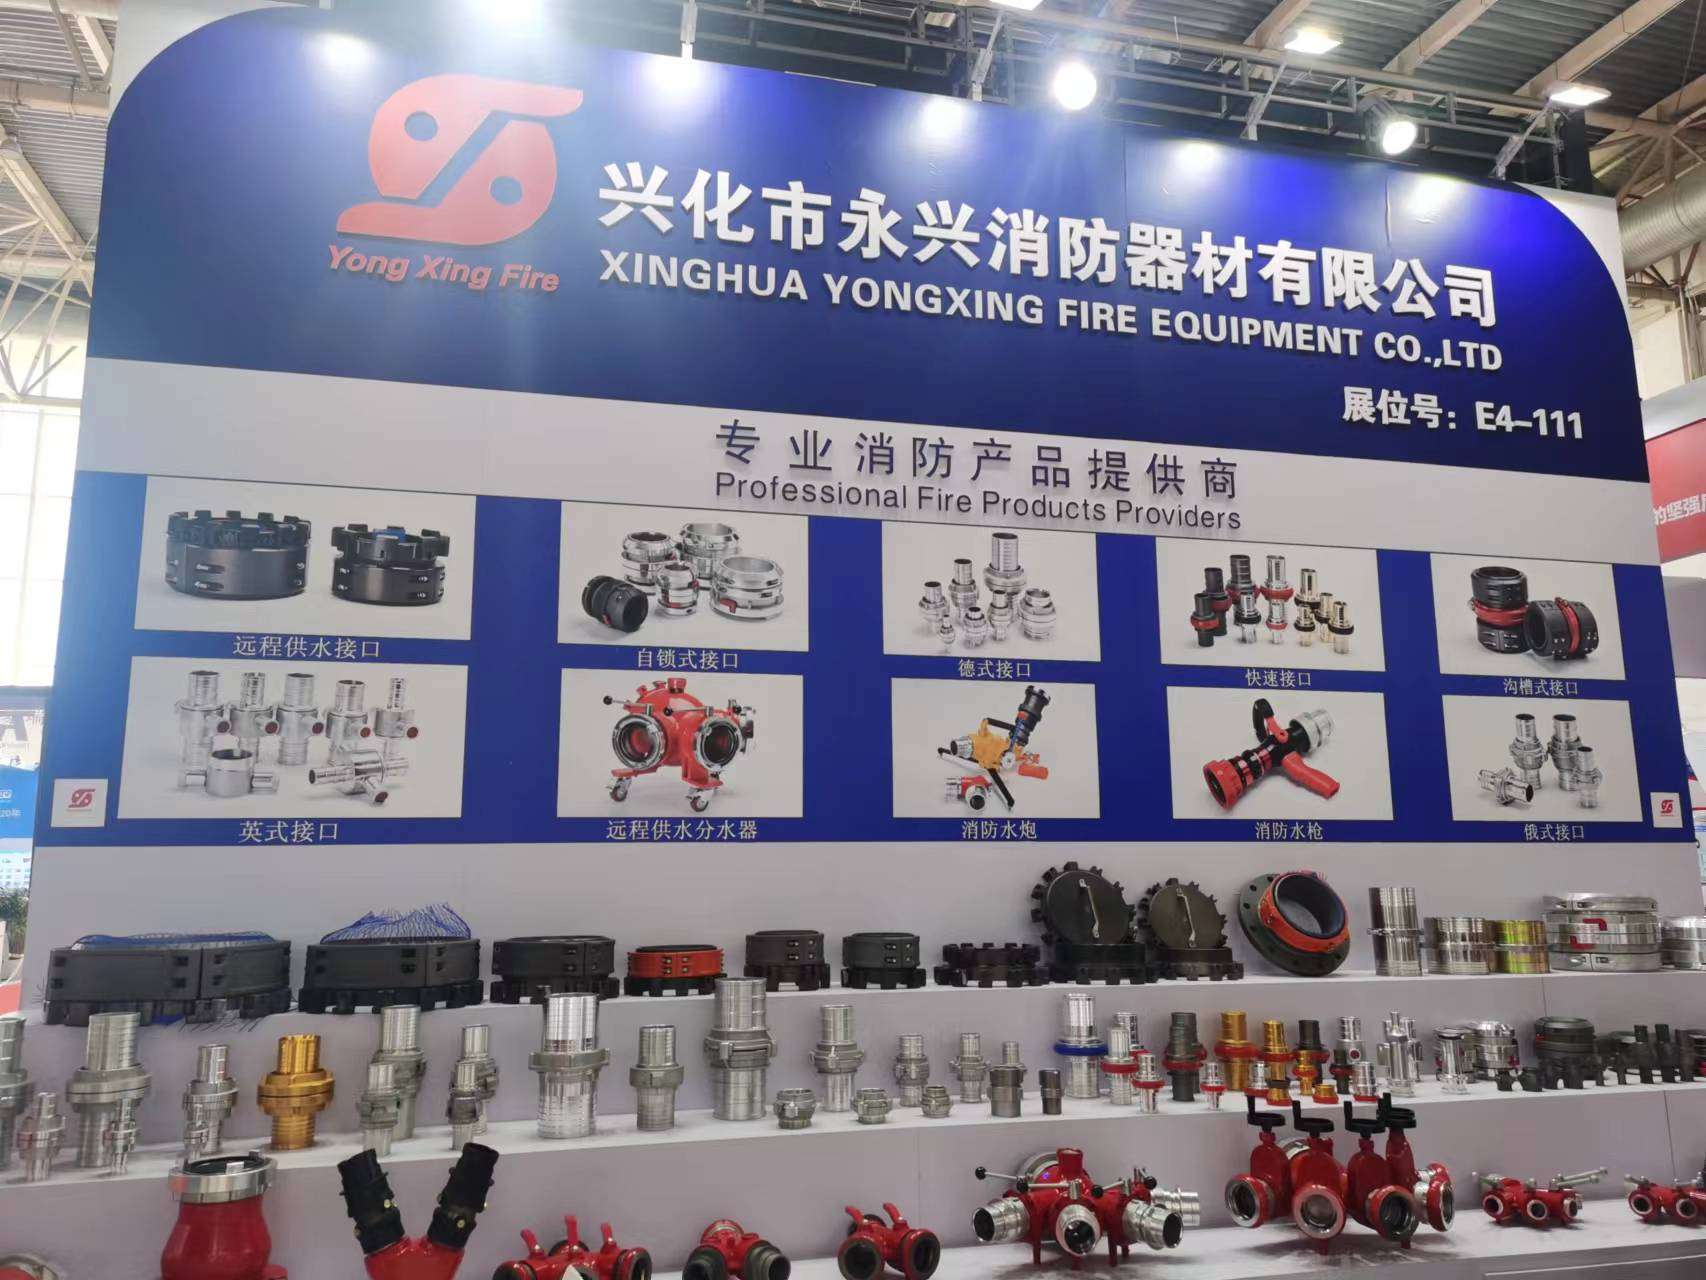 The 19th China International Fire Equipment Technology Exchange Exhibition